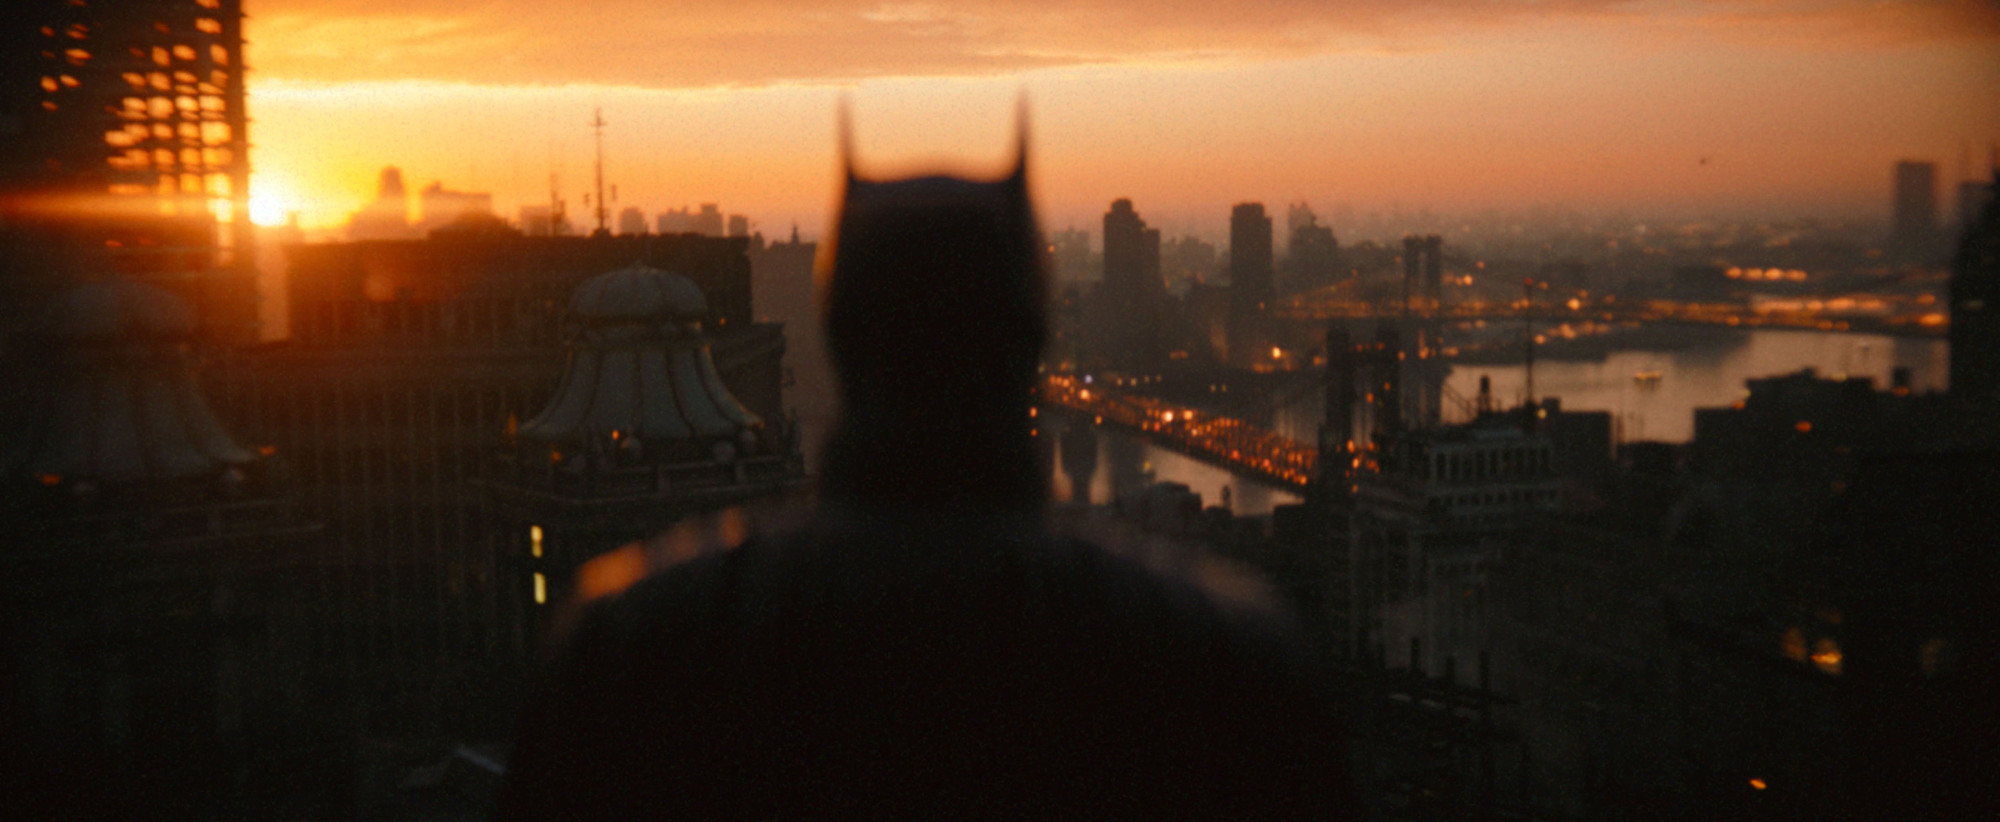 "The Batman" arrives in theaters on March 4, 2022.